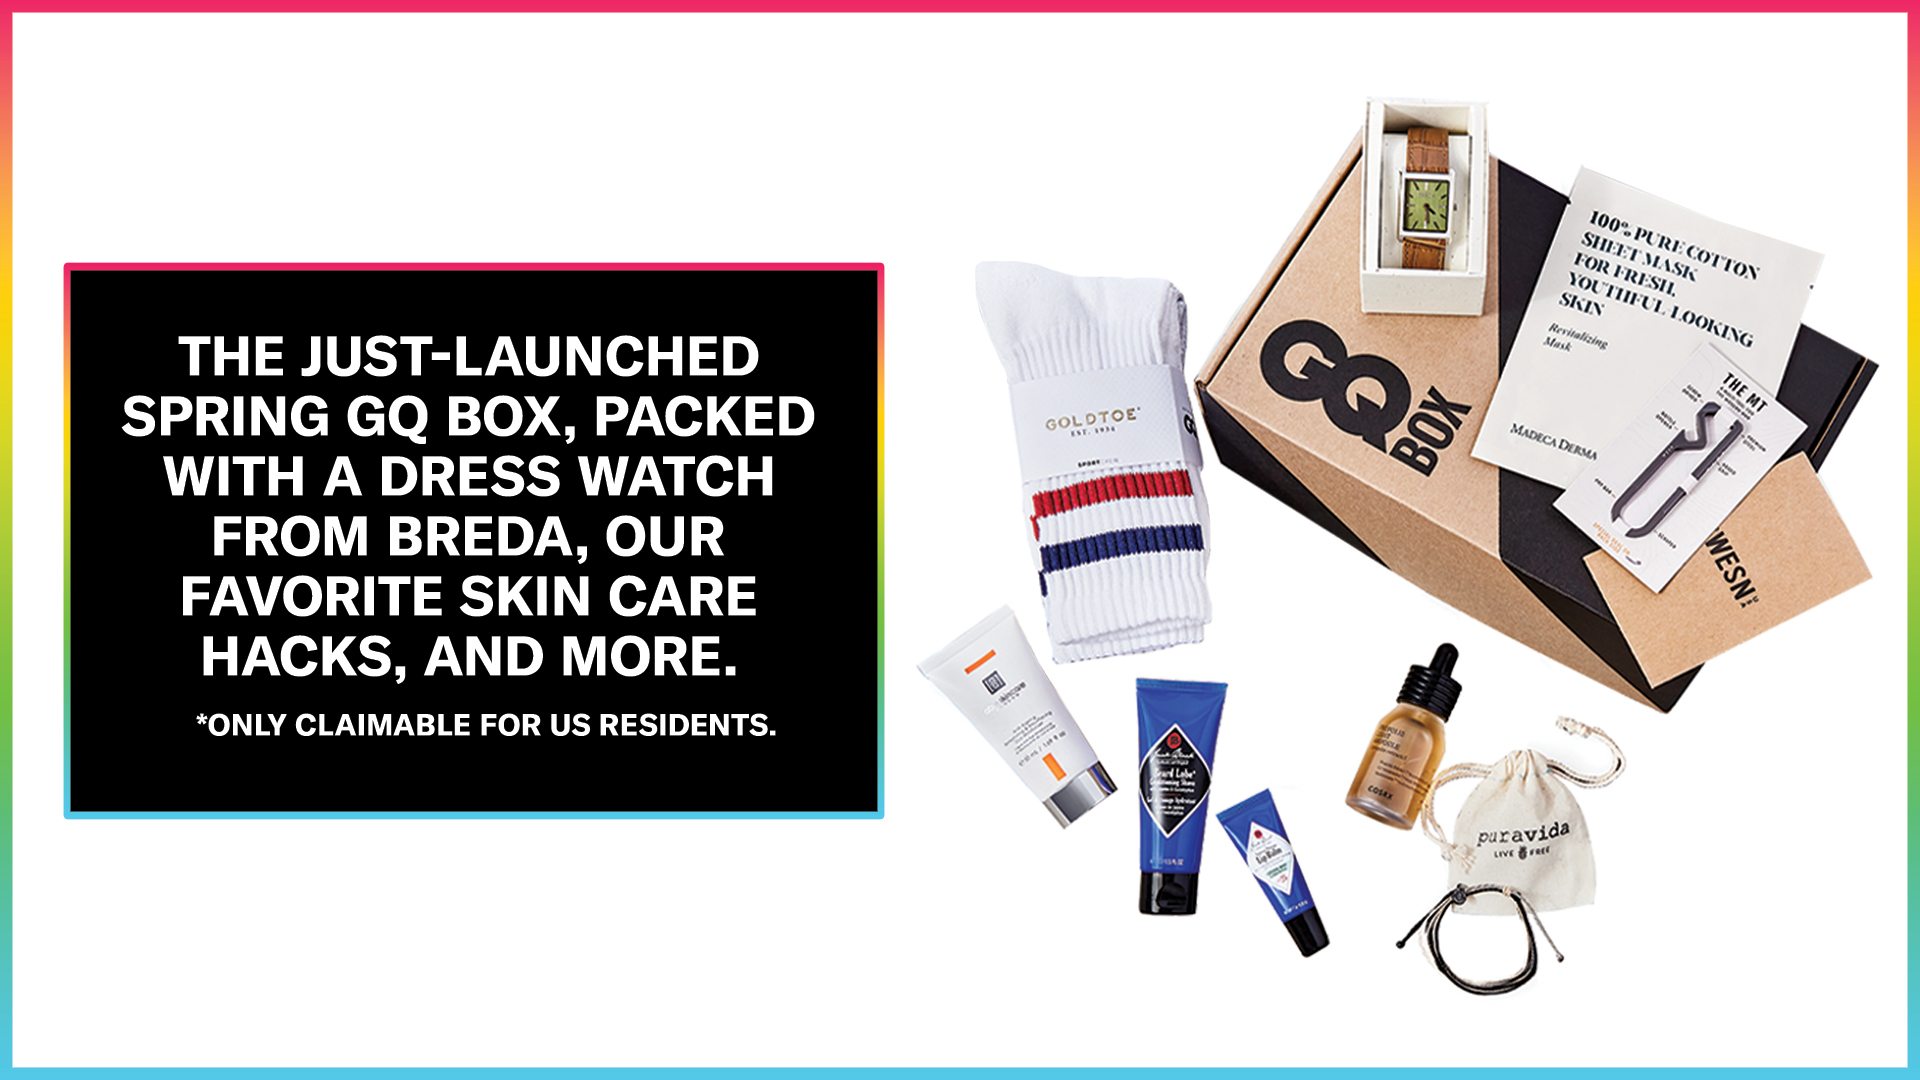 The Spring edition of the GQ Box